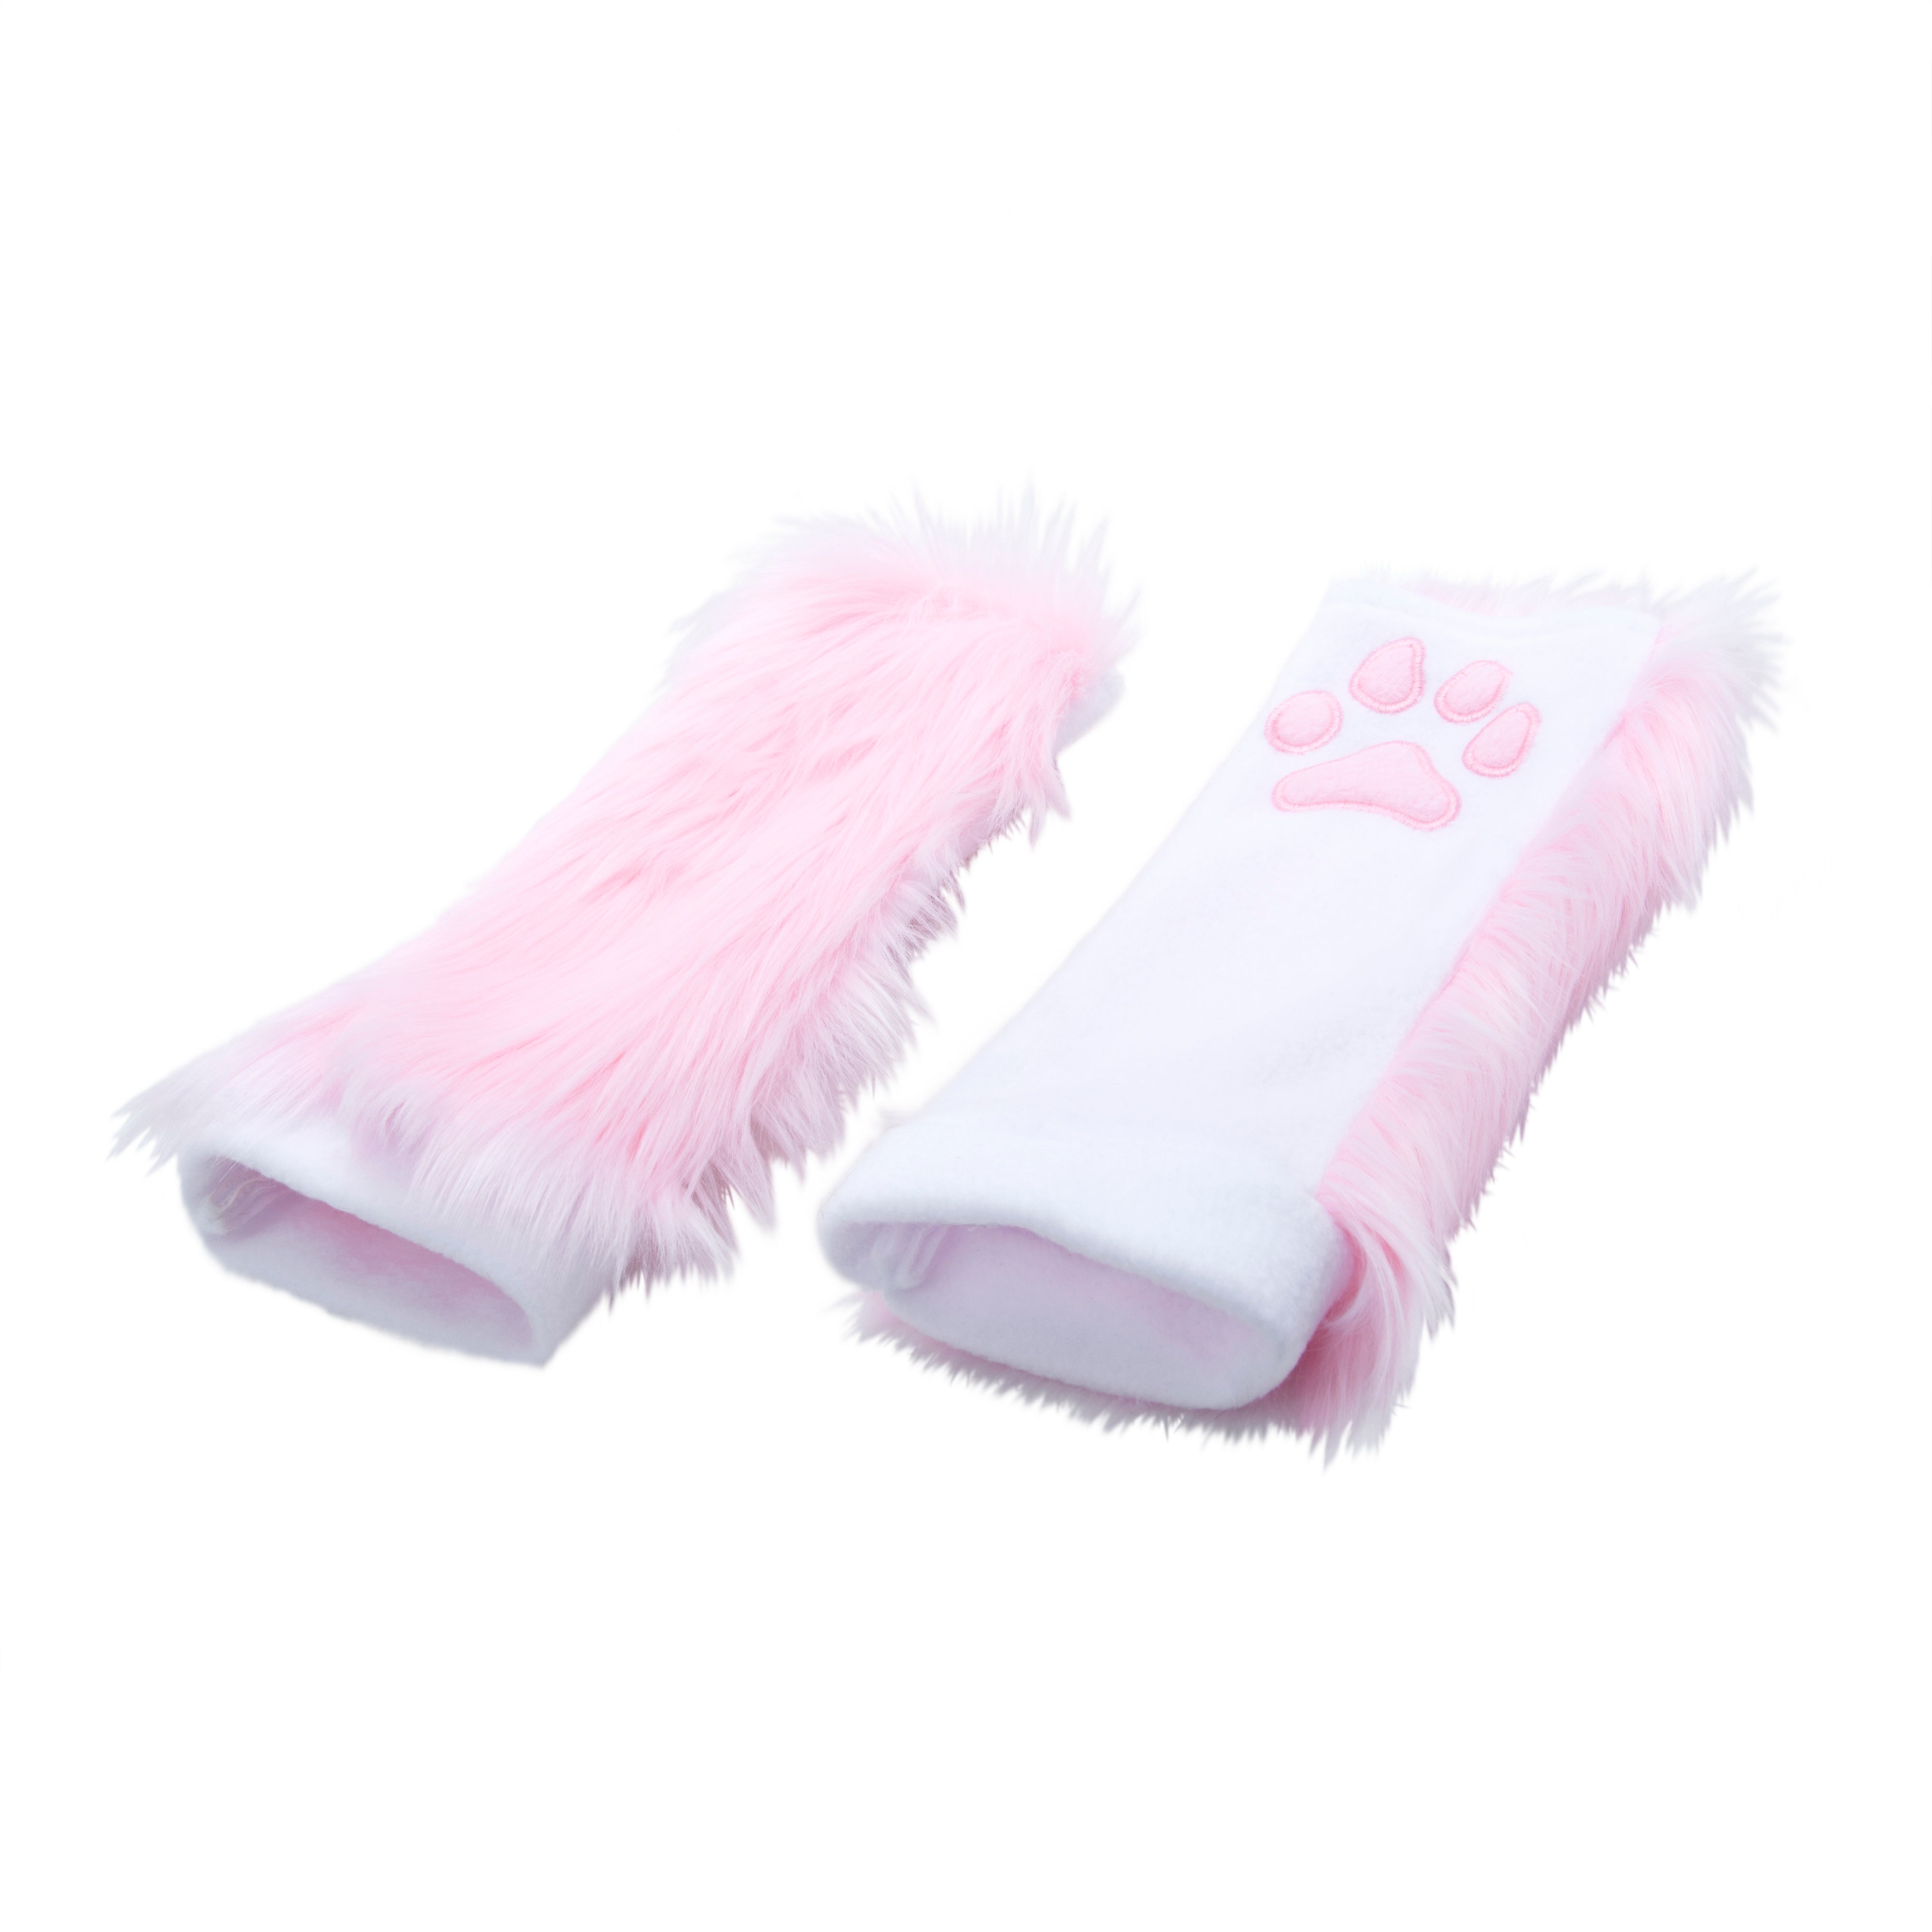 pastel pink Pawstar PawWarmer furry faux fur paws. great for cosplay or partial fursuit.